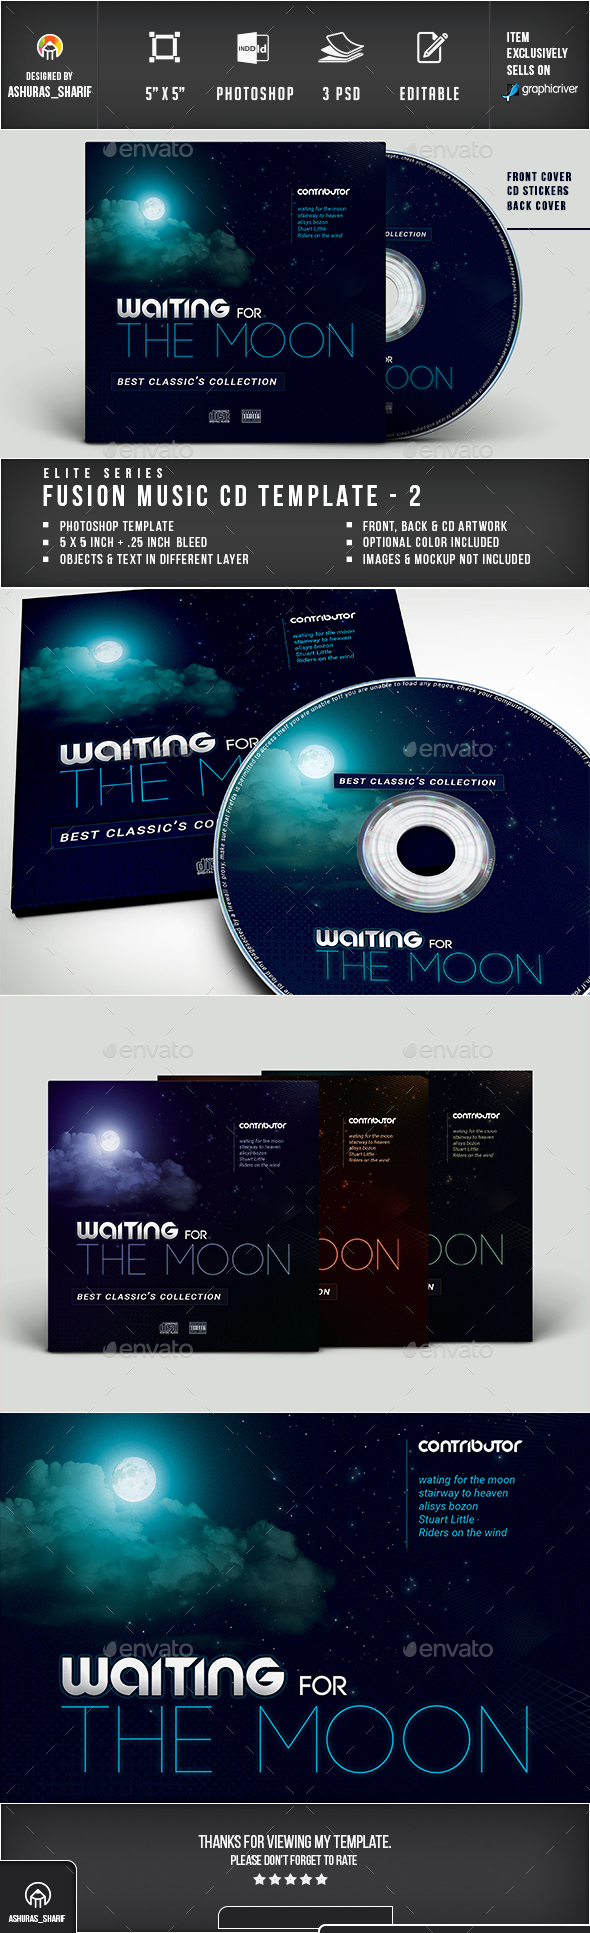 Cd Cover Graphics Designs Templates From Graphicriver